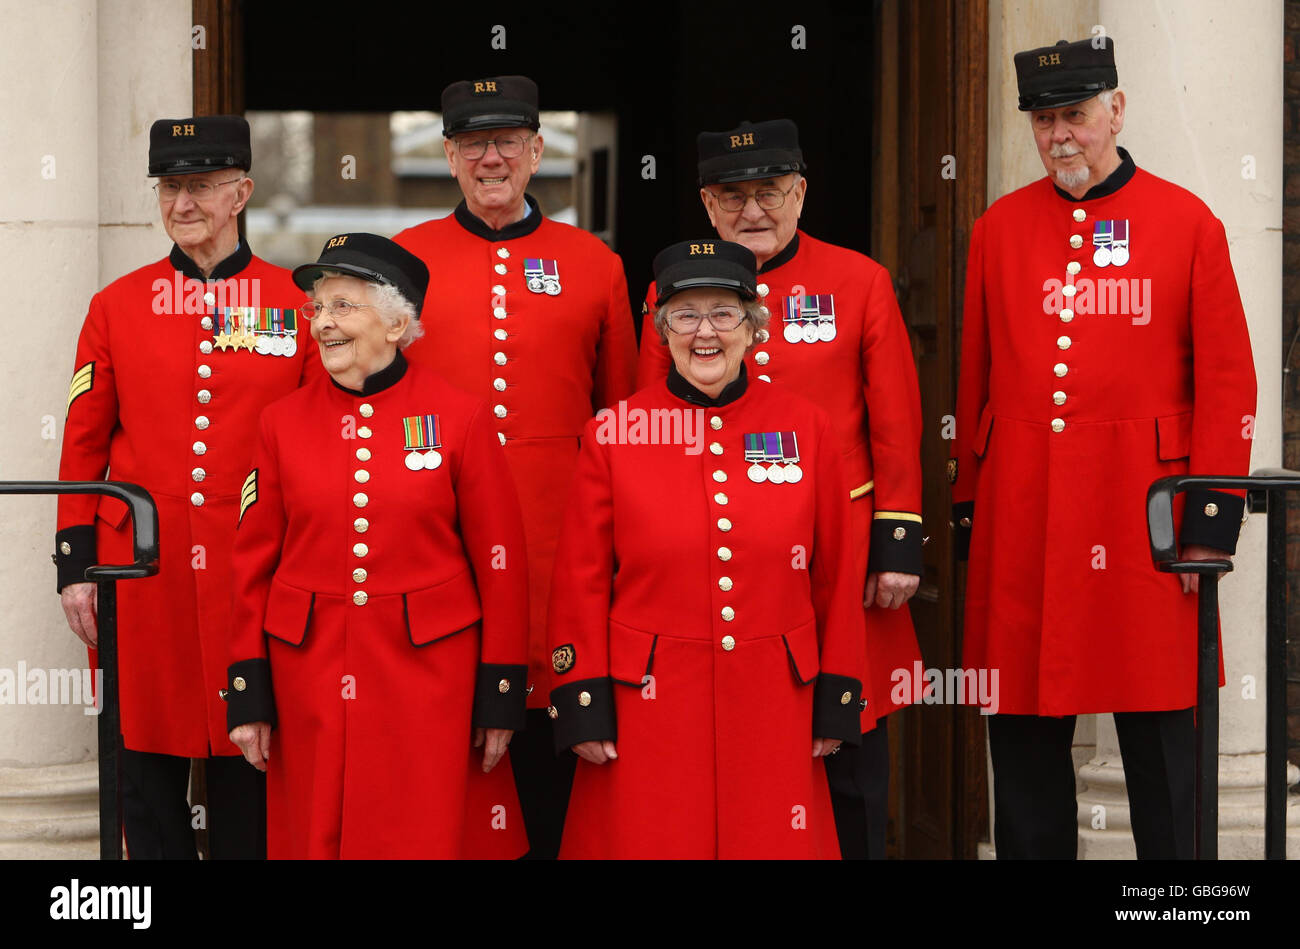 Winifred Phillips (front right) and Dorothy Hughes (front left) are welcomed by Chelsea Pensioners (back left to right) Lewis Prangle, Geoff Crowther, Ralph Dickinson and Alan Swain as the first women Chelsea pensioners at the Royal Hospital Chelsea in London. Stock Photo